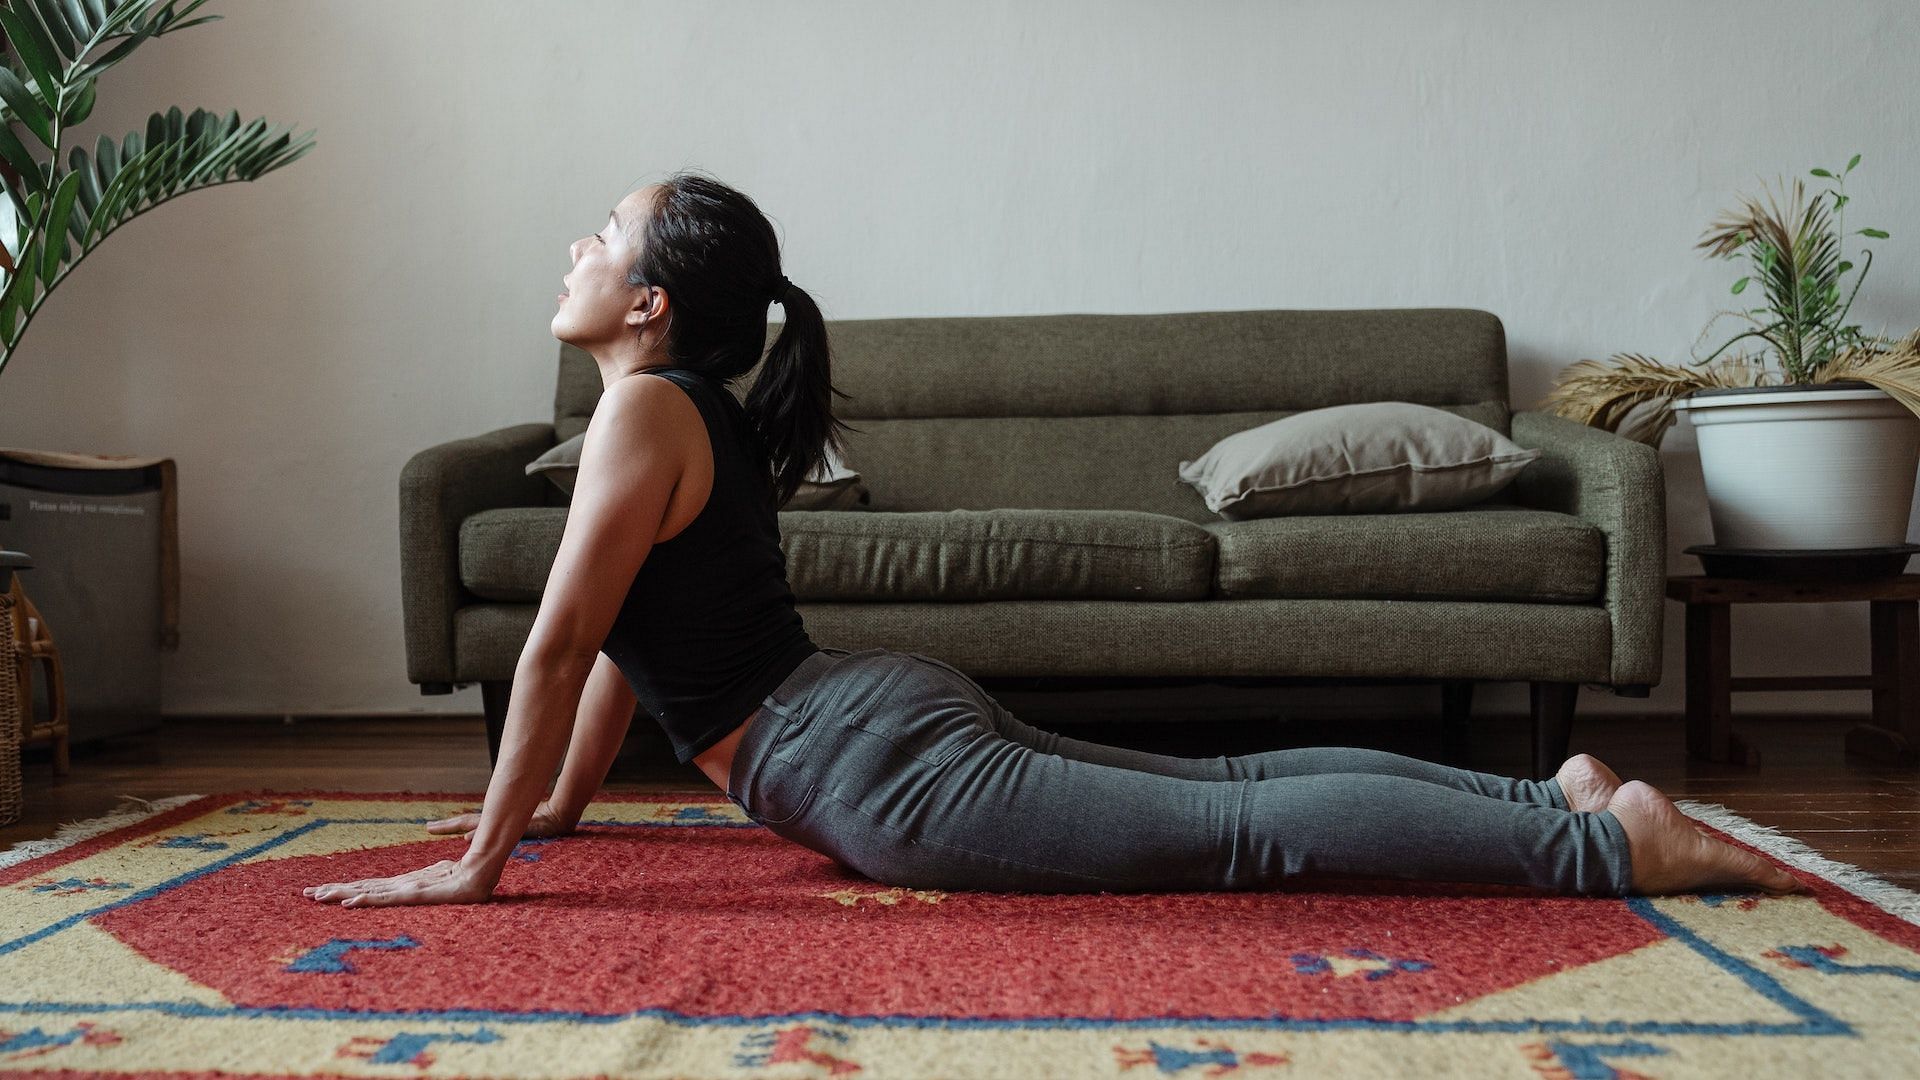 The cobra pose is an effective bodyweight exercise for the back. (Photo via Pexels/Ketut Subiyanto)